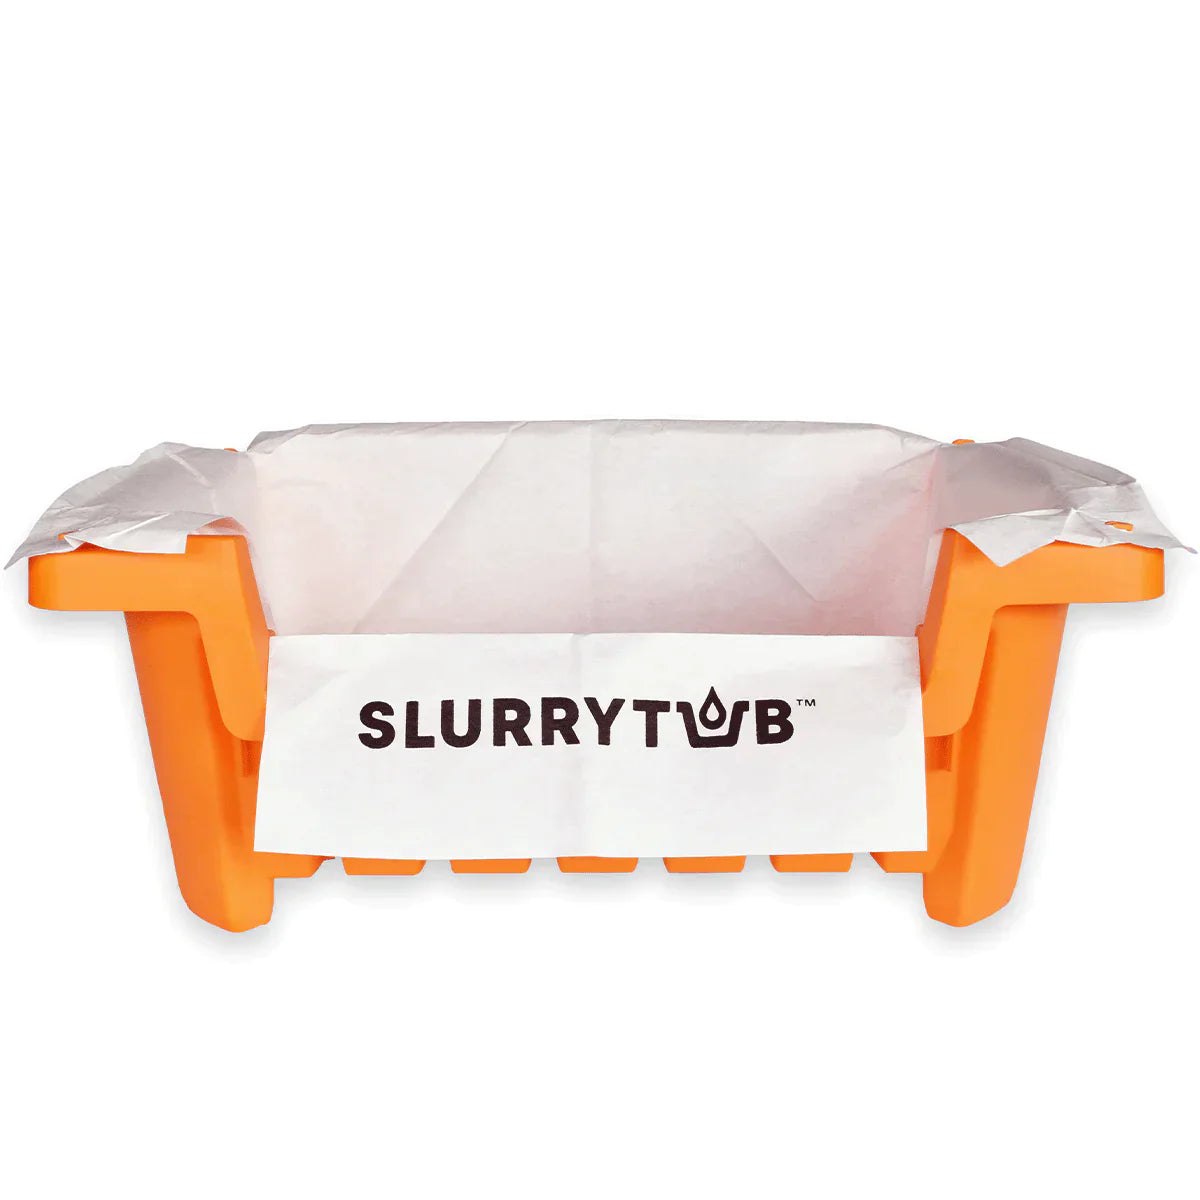 SLURRYTUB Trade Twin Pack Kit -2 Tubs With 24 Filters